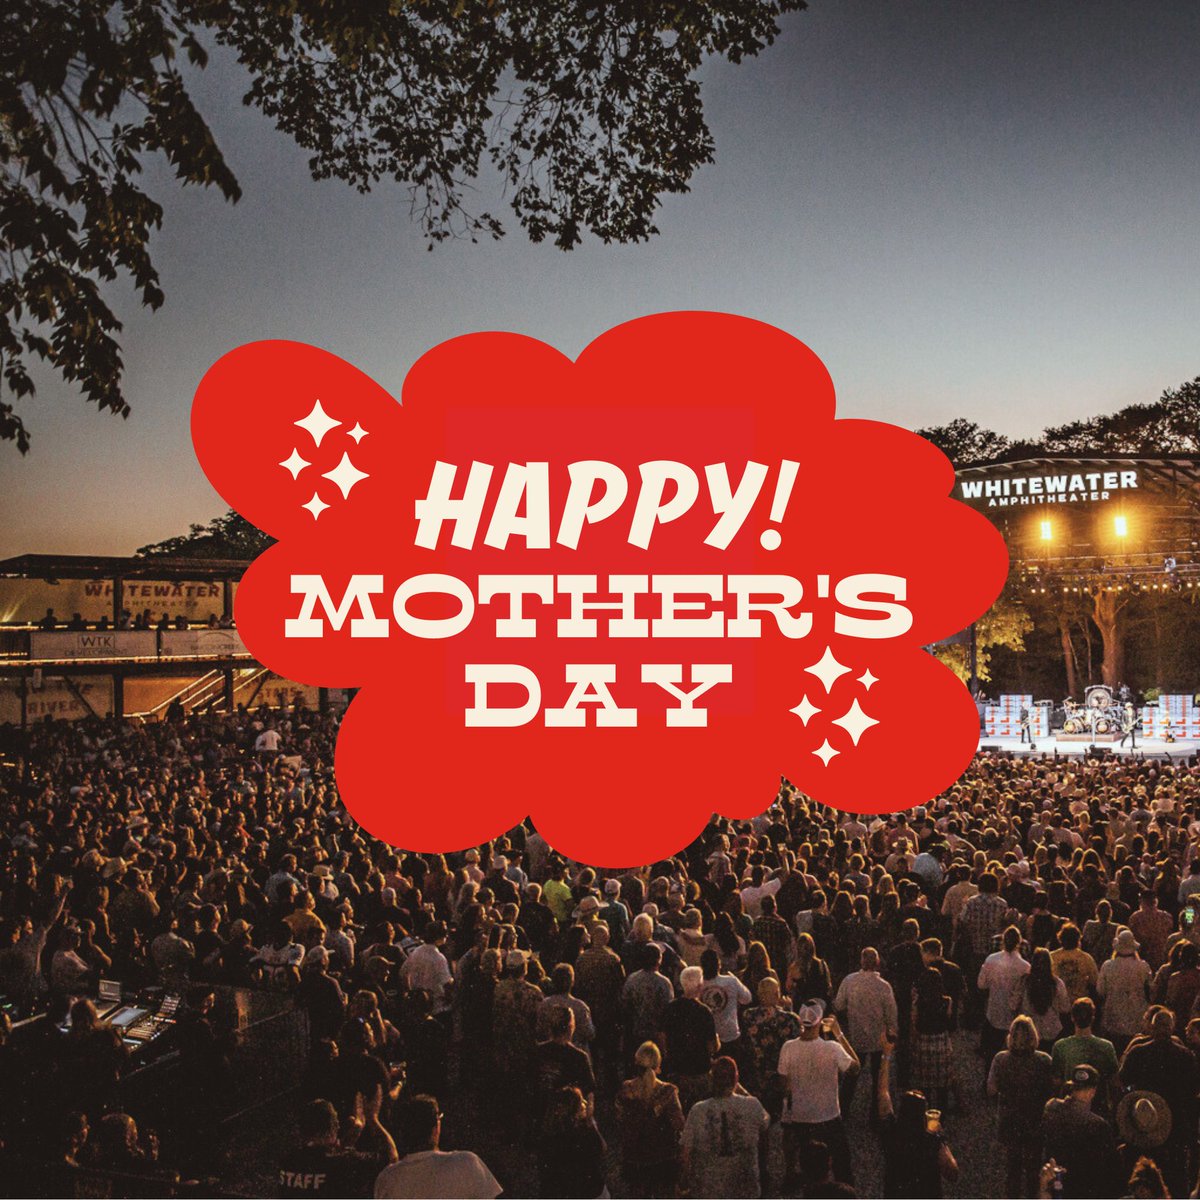 Happy Mother's Day from our family to yours ❤

#mothersday #celebrate #nbtx #ontheriverunderthestars